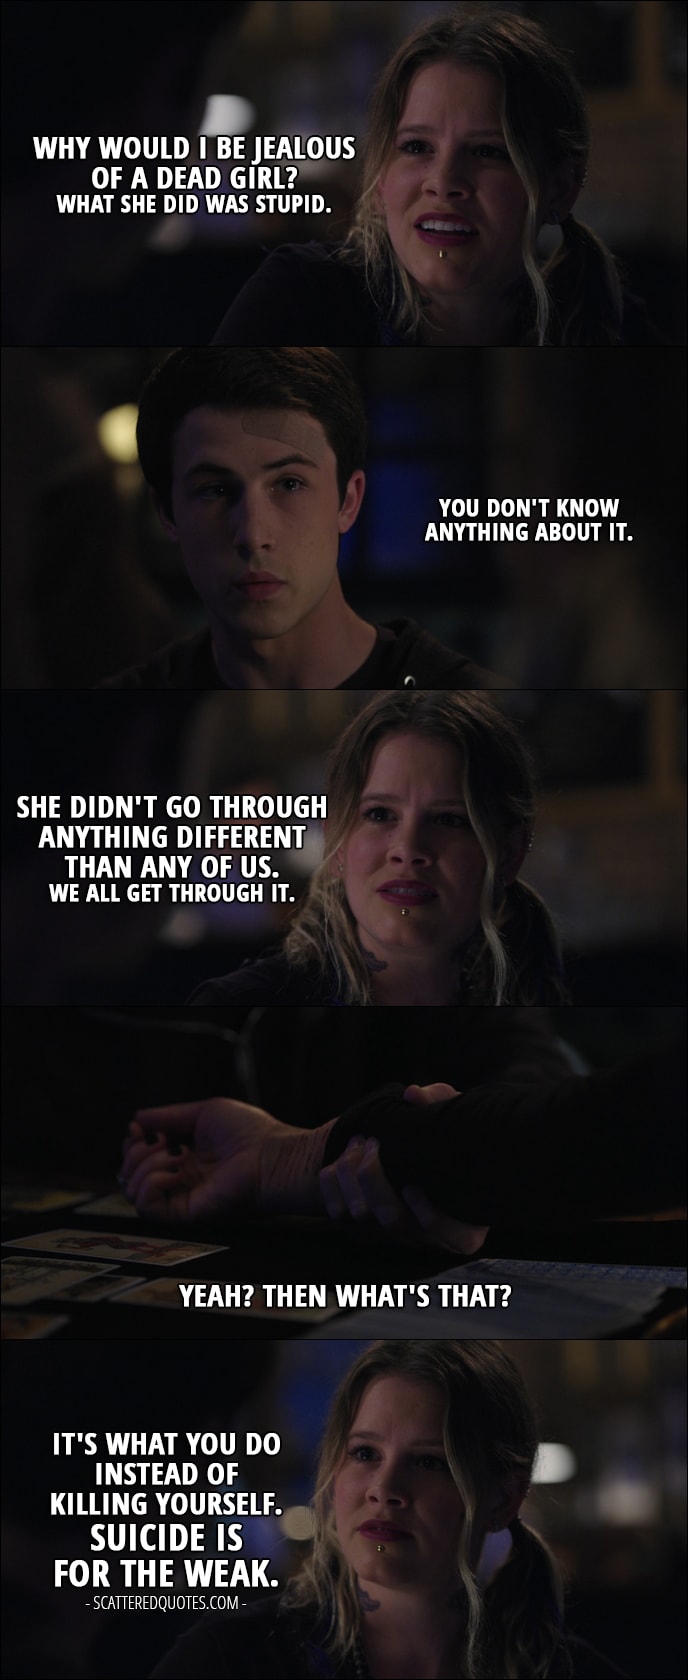 Quote from 13 Reasons Why 1x11 - Skye Miller: Why would I be jealous of a dead girl? What she did was stupid. Clay Jensen: You don't know anything about it. Skye Miller: She didn't go through anything different than any of us. We all get through it. Clay Jensen: Yeah? Then what's that? Skye Miller: It's what you do instead of killing yourself. Suicide is for the weak.